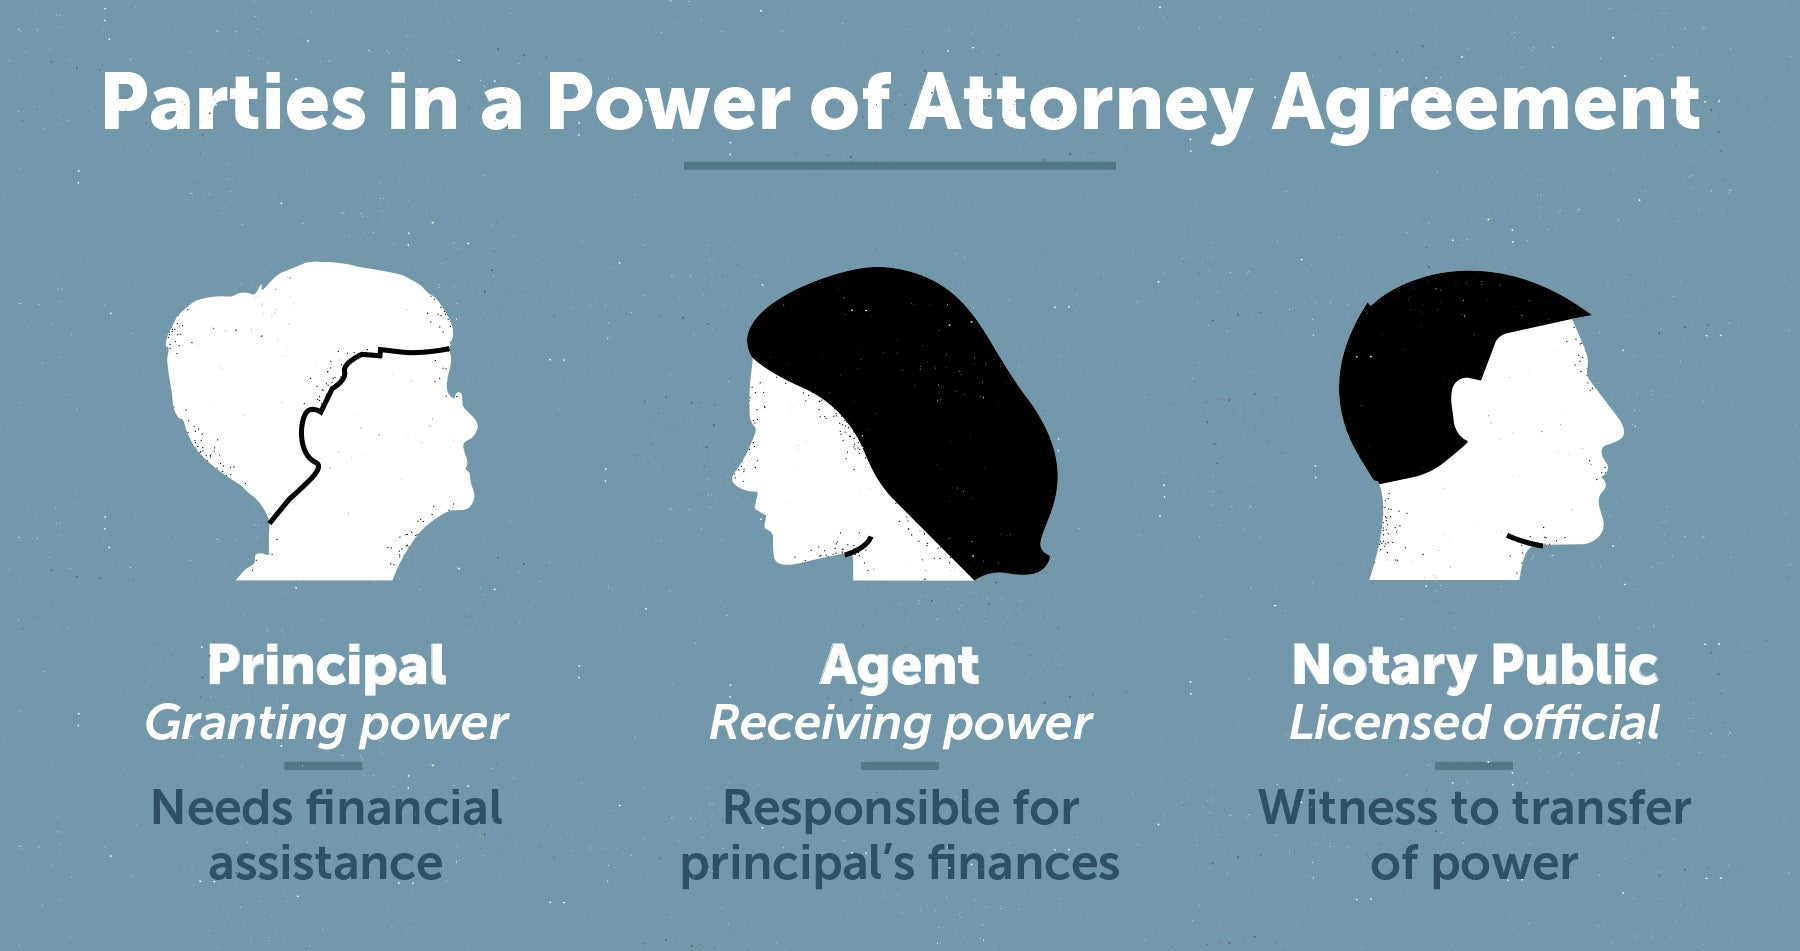 three parties in a power of attorney agreement